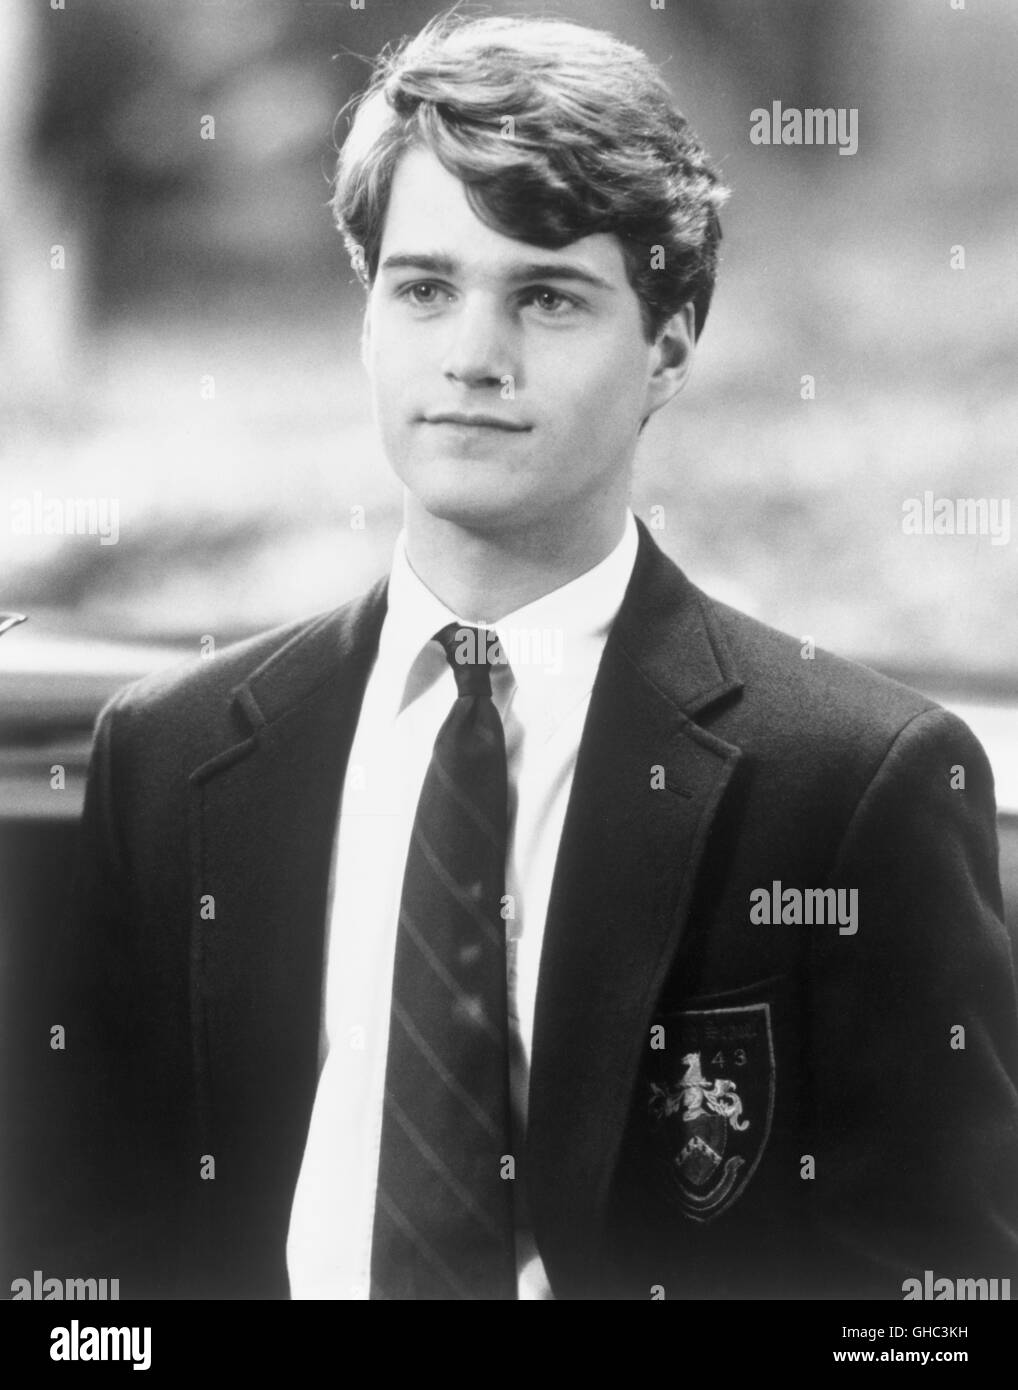 DER DUFT DER FRAUEN Scent of a Woman USA 1992 Martin Brest CHRIS O'DONNELL as 17-year-old Charlie Simms, a straight-laced scholarship student at a prestigious prep school. Regie: Martin Brest aka. Scent of a Woman Stock Photo